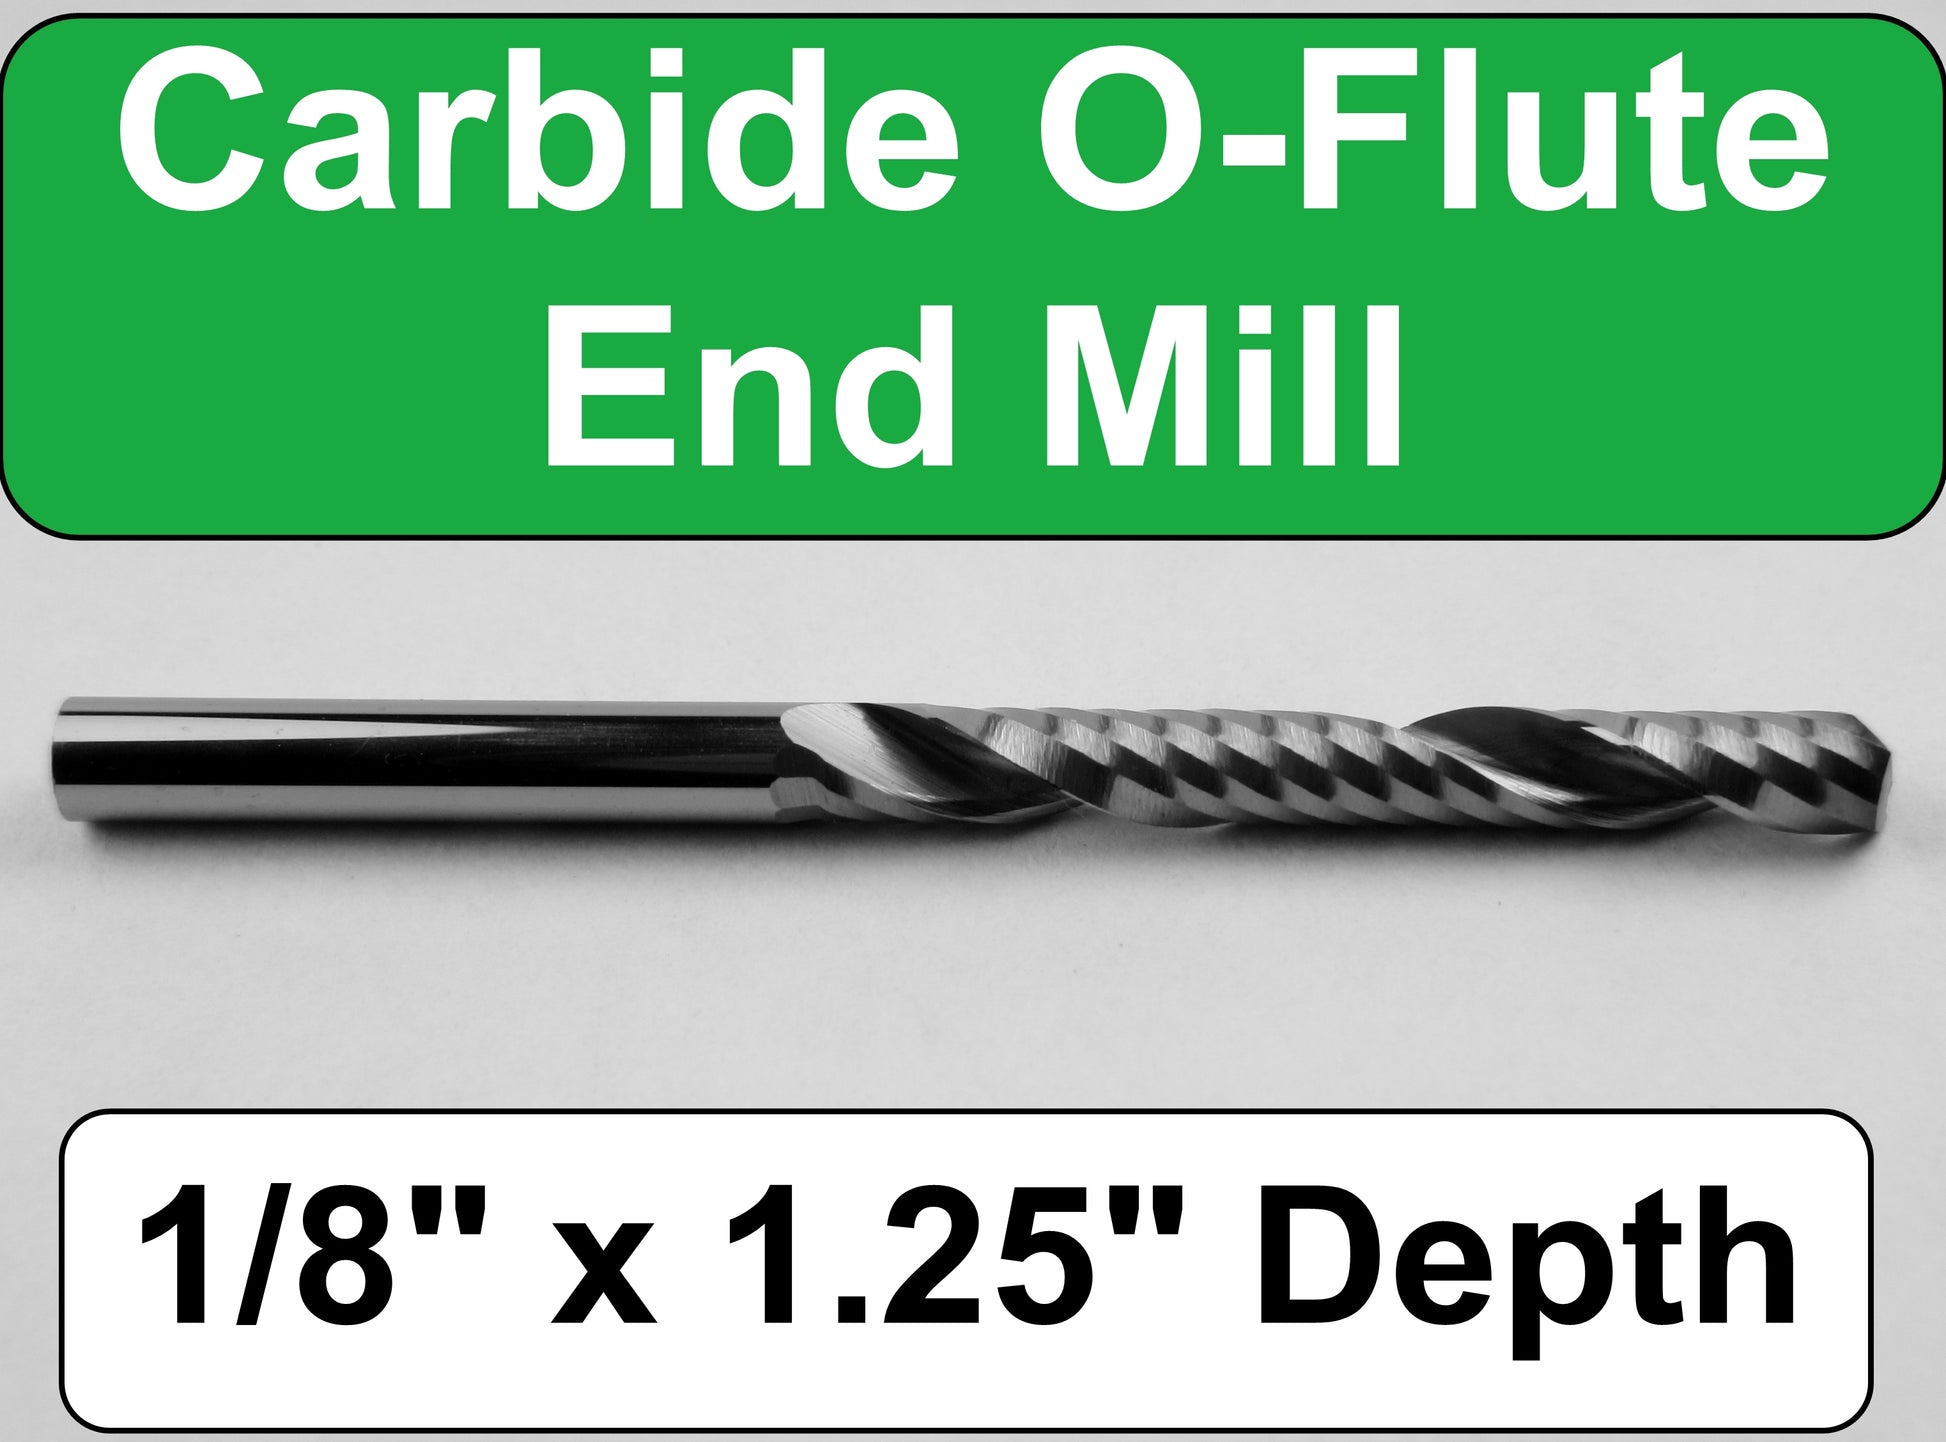 End Mill for cnc machining plastic, acrylic, aluminum and soft metals.